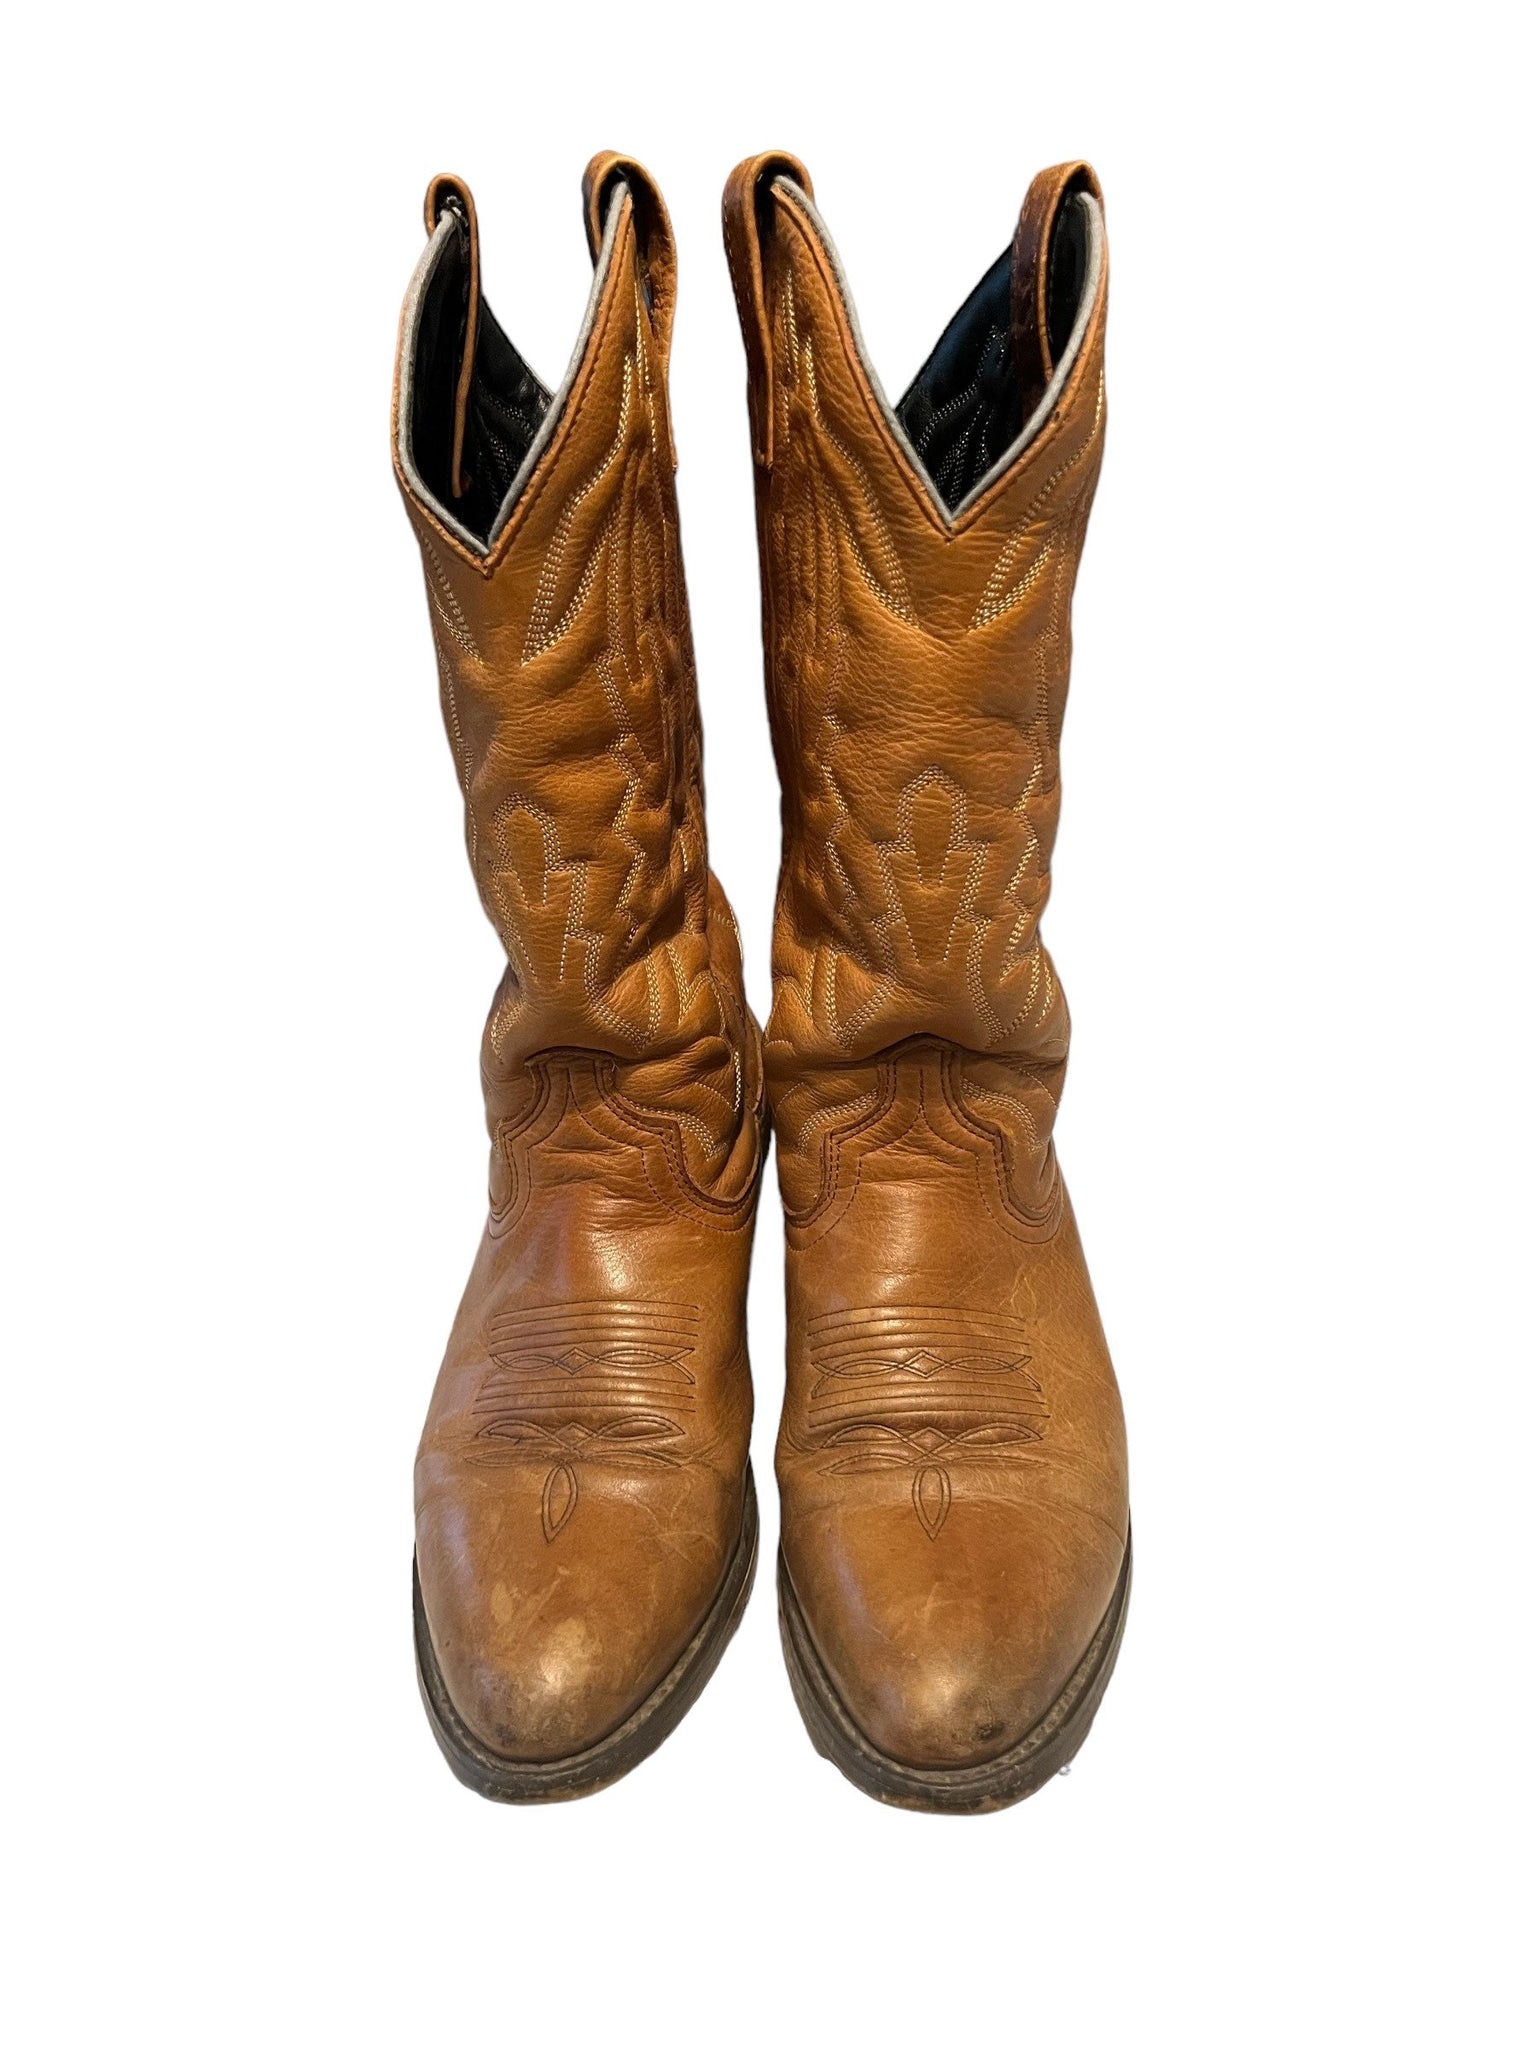 Vintage women's  Lucchese 2000 brown cowboy boots 7 B